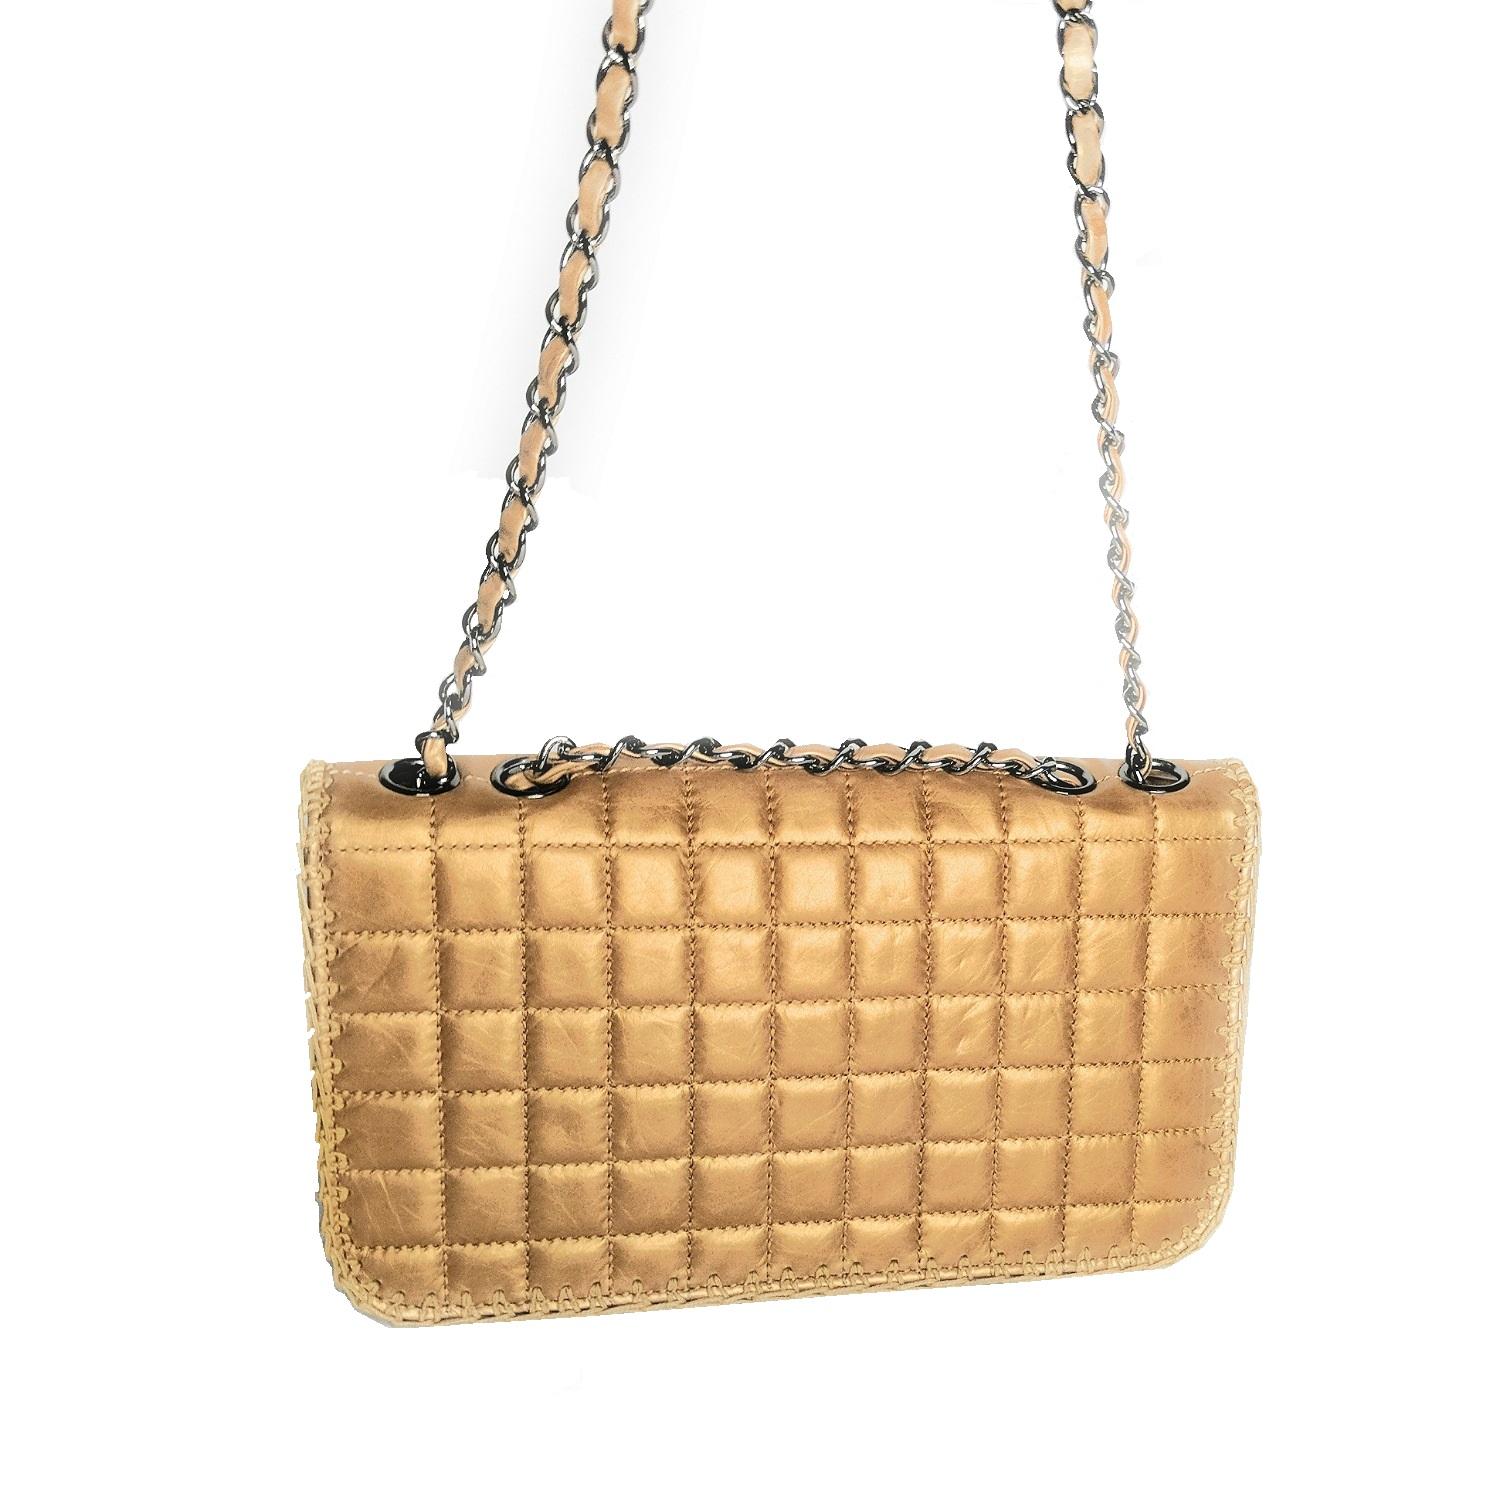 Metallic dark beige square quilted aged calf leather Chanel Reissue Flap Bag with ruthenium hardware, adjustable chain-link shoulder strap, beige whipstitch accents at edges, single slip pocket at flap underside, tonal woven lining, single zip